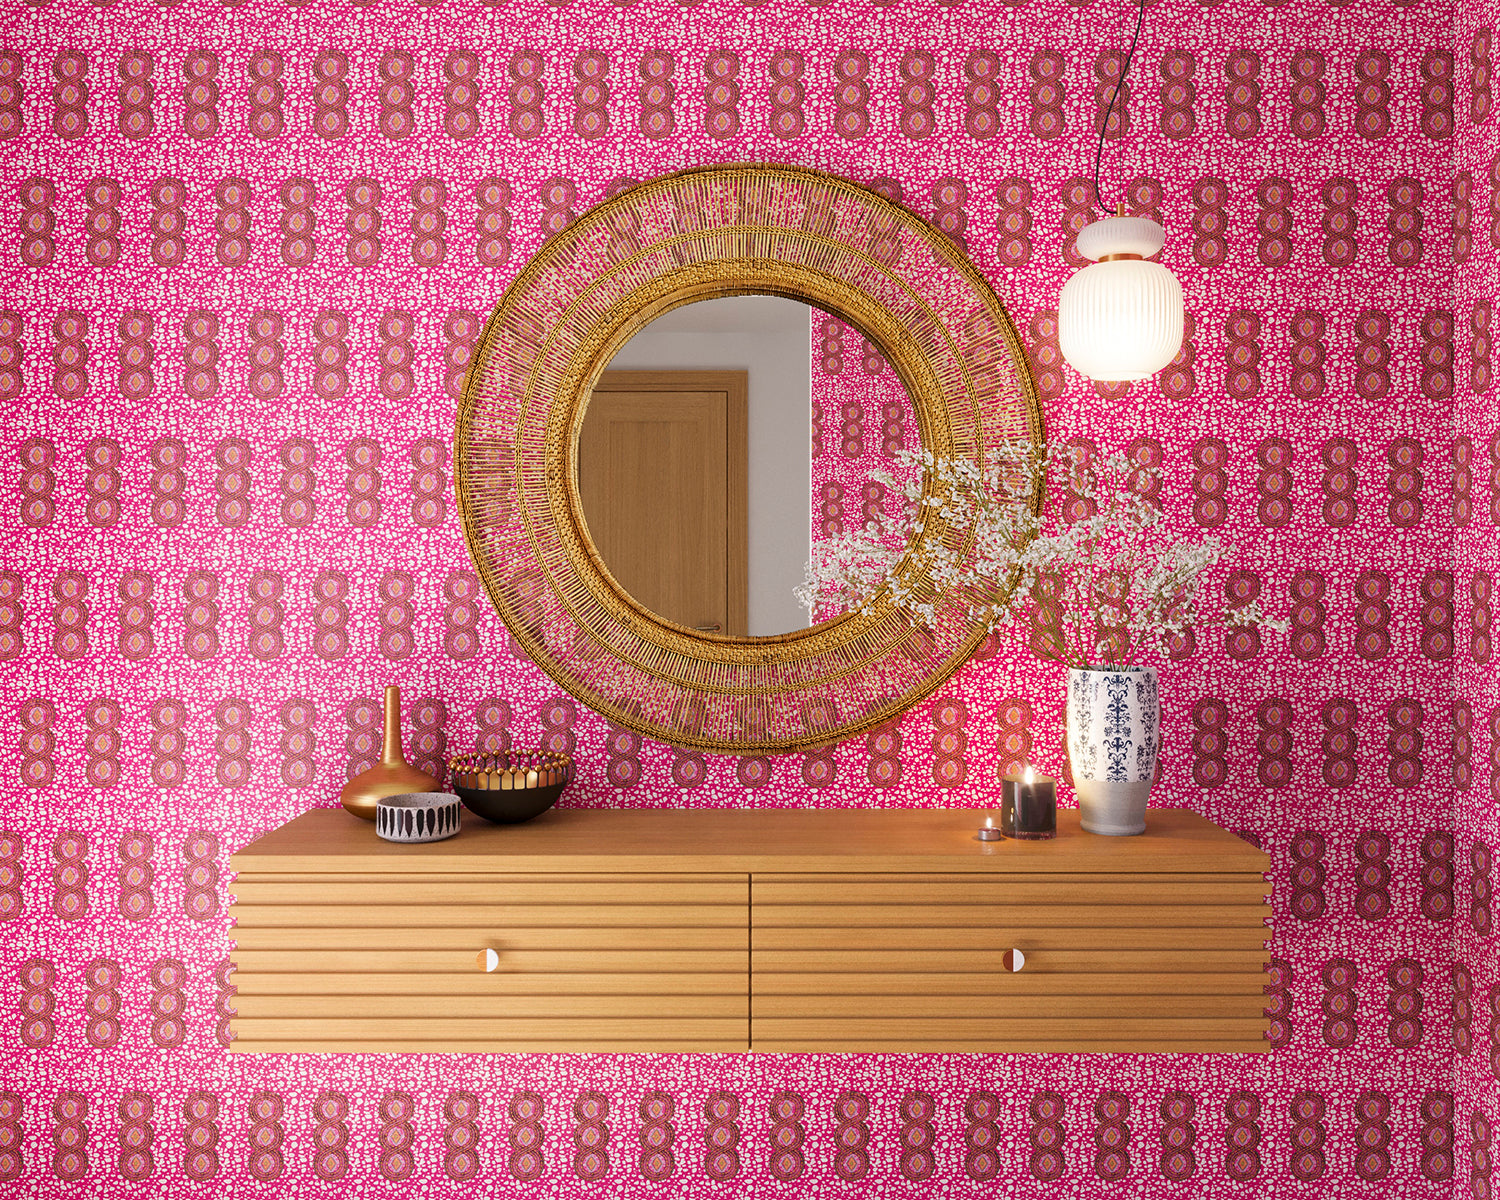 A floating shelf and statement mirror hang on a wall papered in a curvilinear print in pink, red, orange and white.